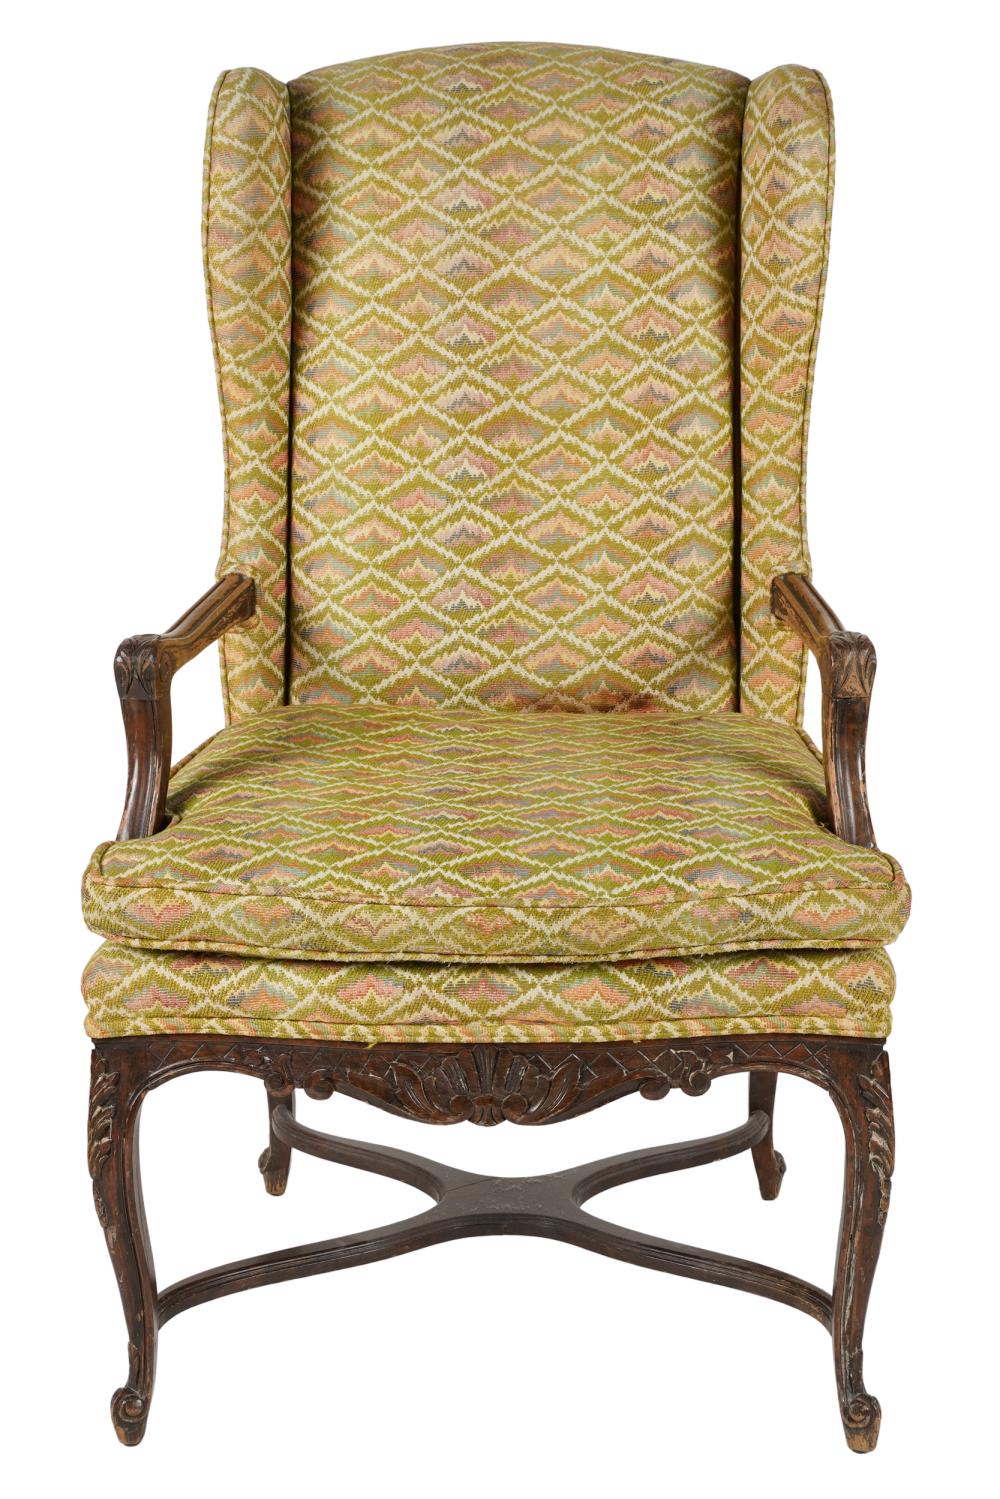 PROVINCIAL STYLE CARVED WOOD WINGBACK